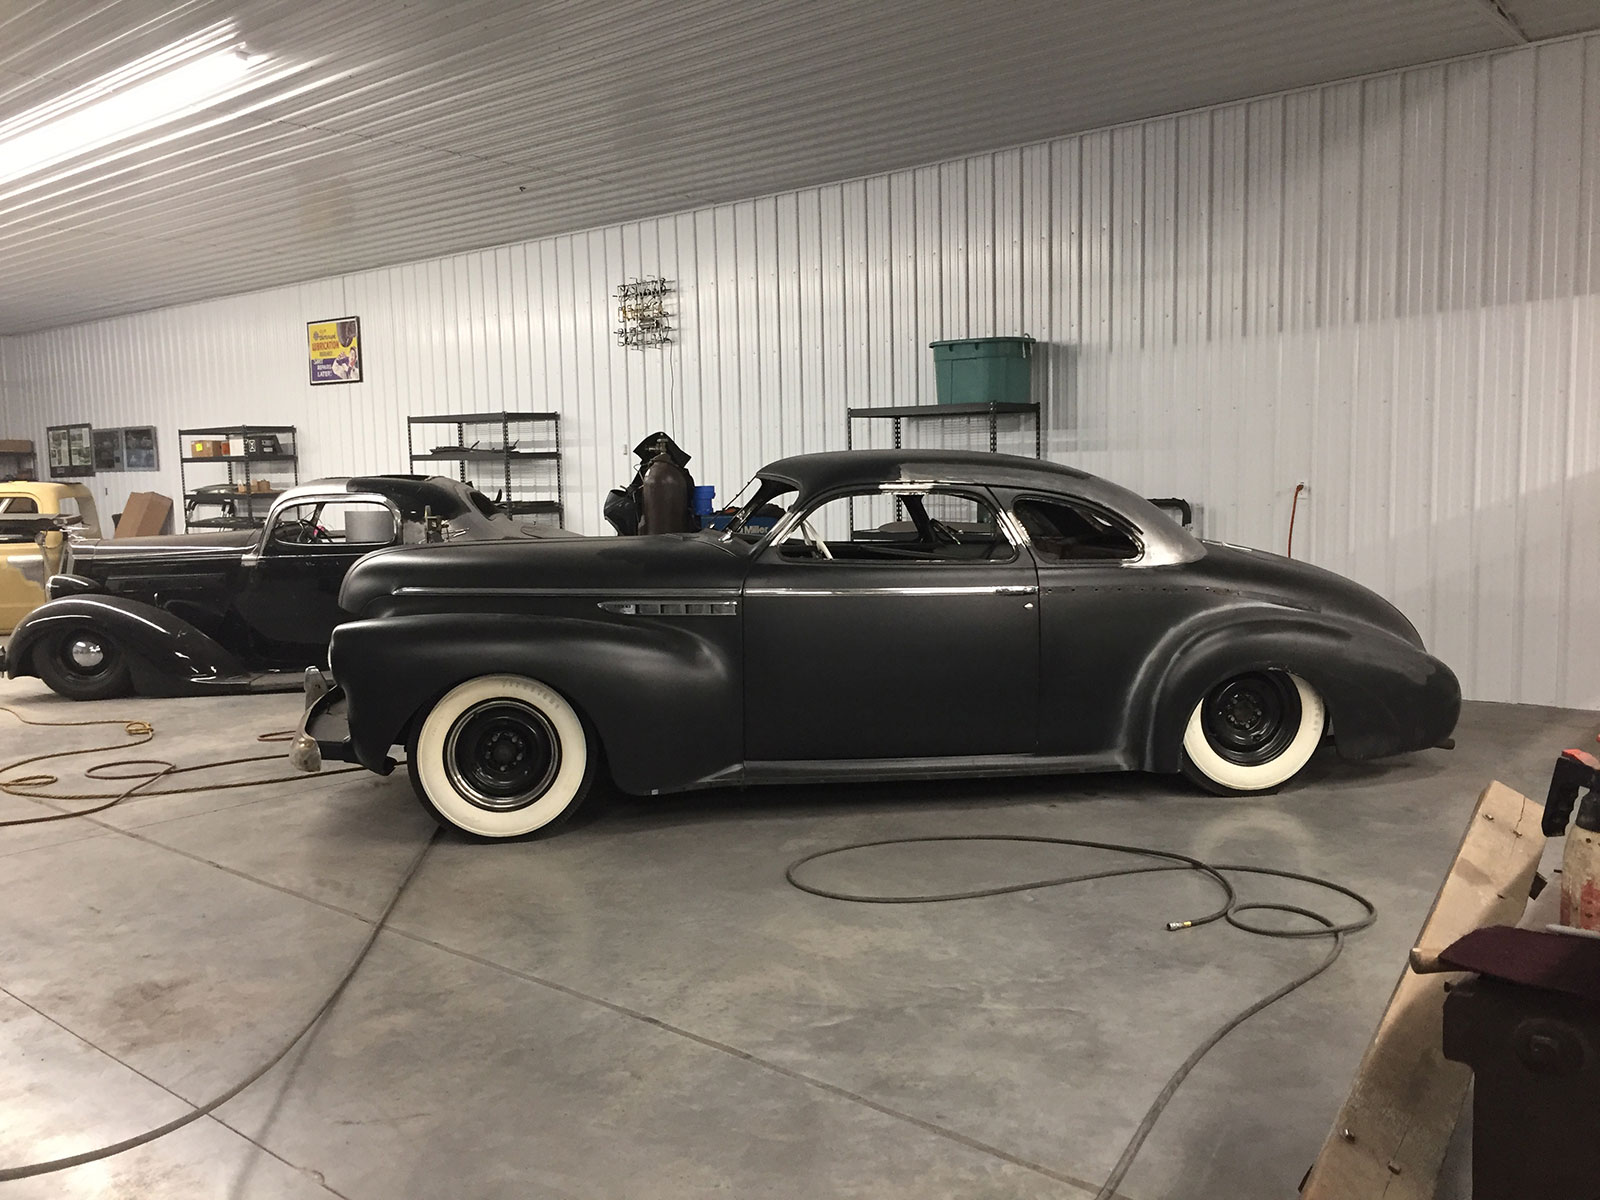 29 Finished profile of Buick car with chopped vent windows and garnish moldings